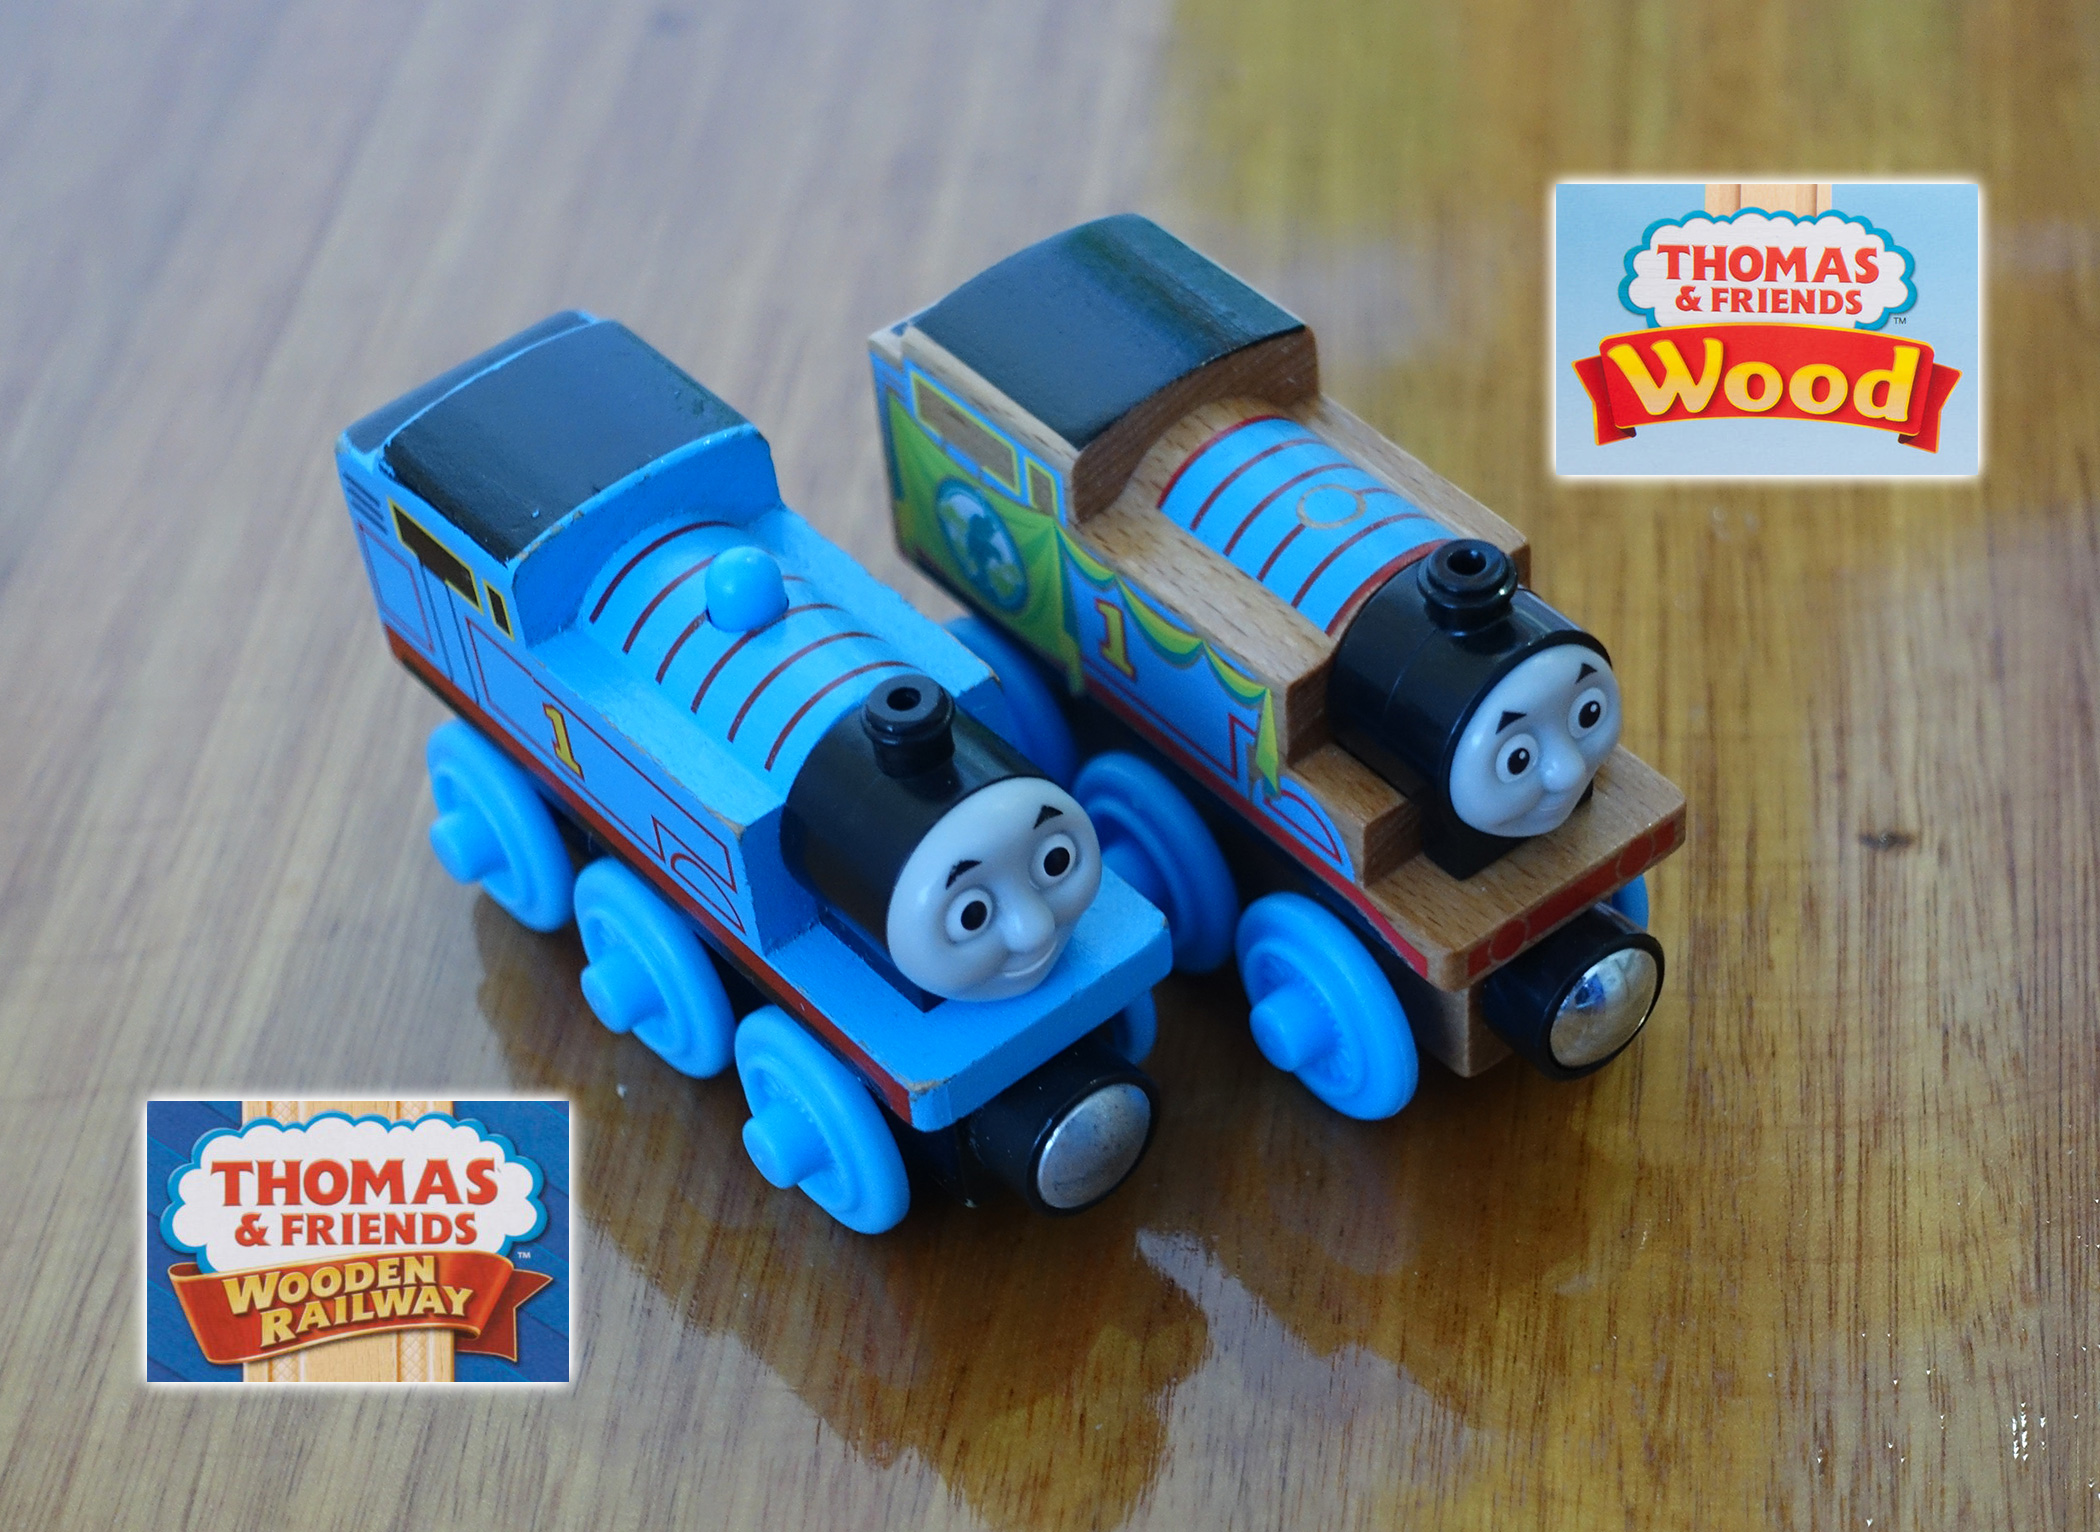 thomas and friends wooden railway 2018